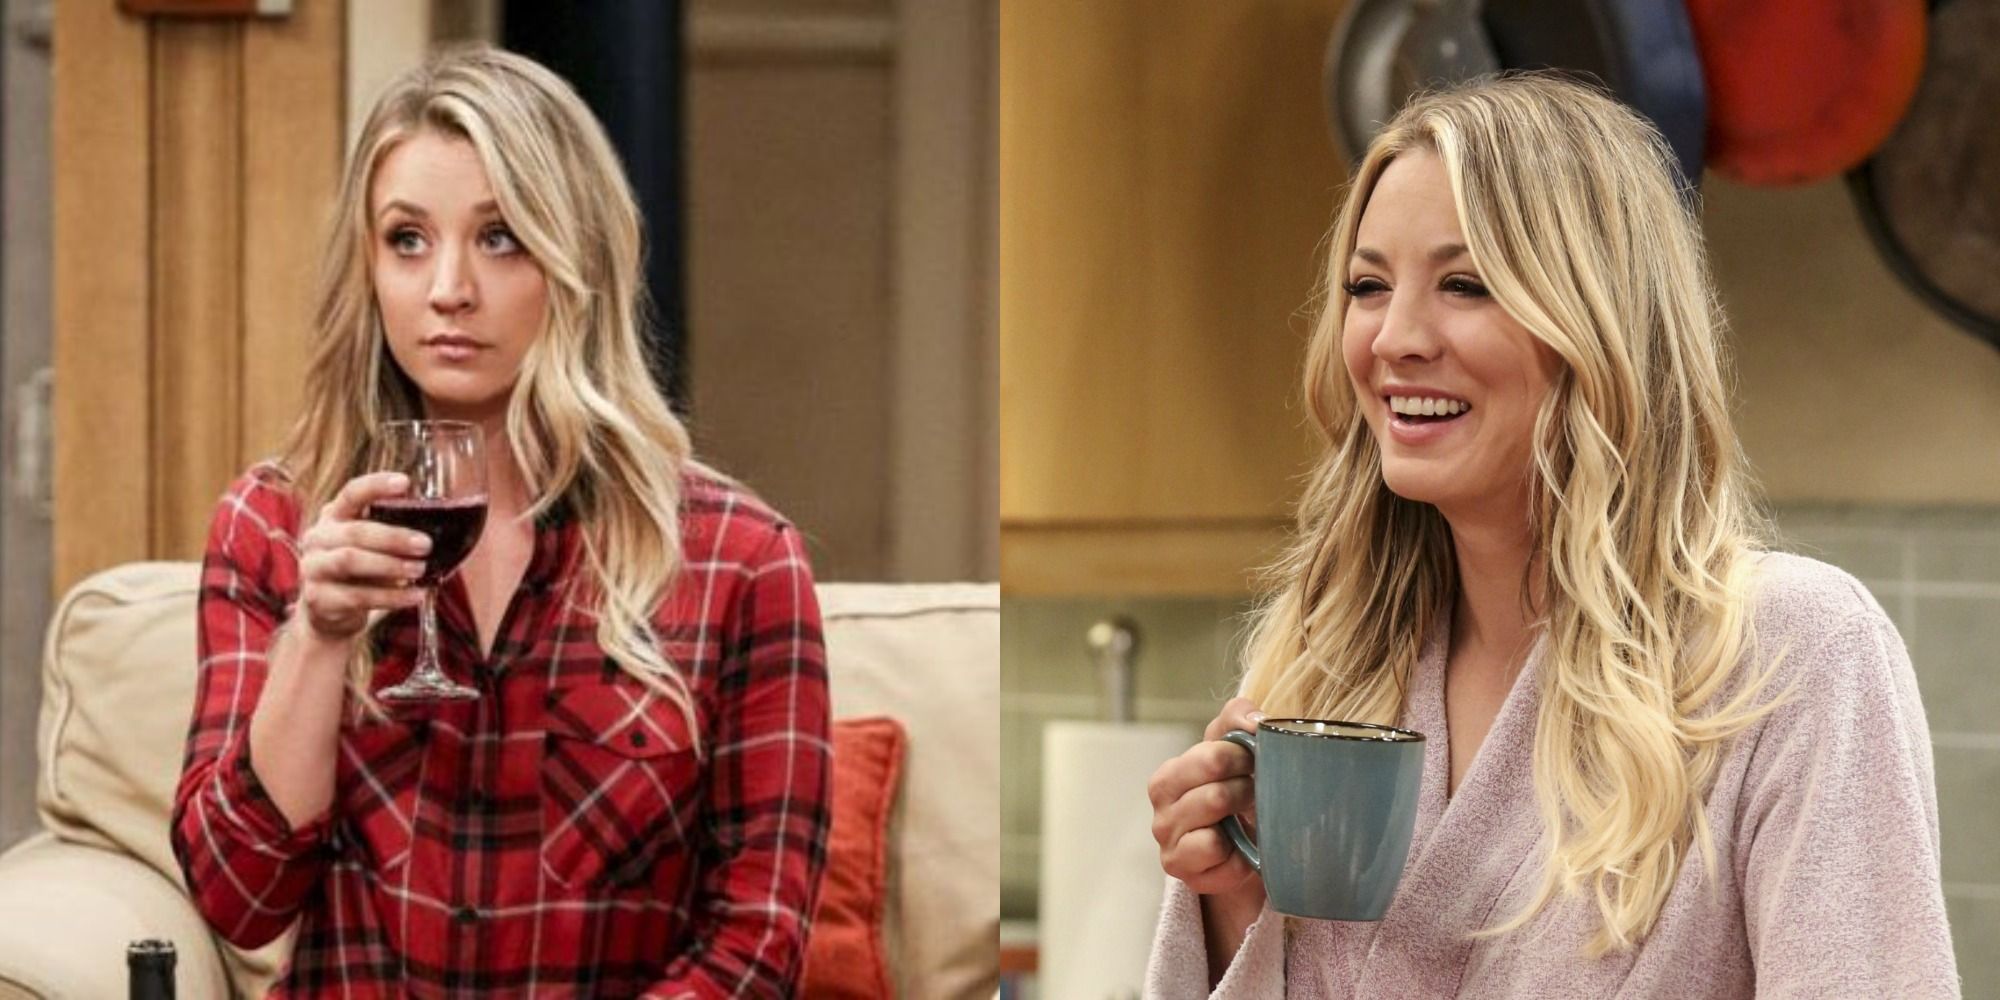 Split image showing Penny smiling while holding a glass of wine and a cup of coffee in The Big Bang Theory